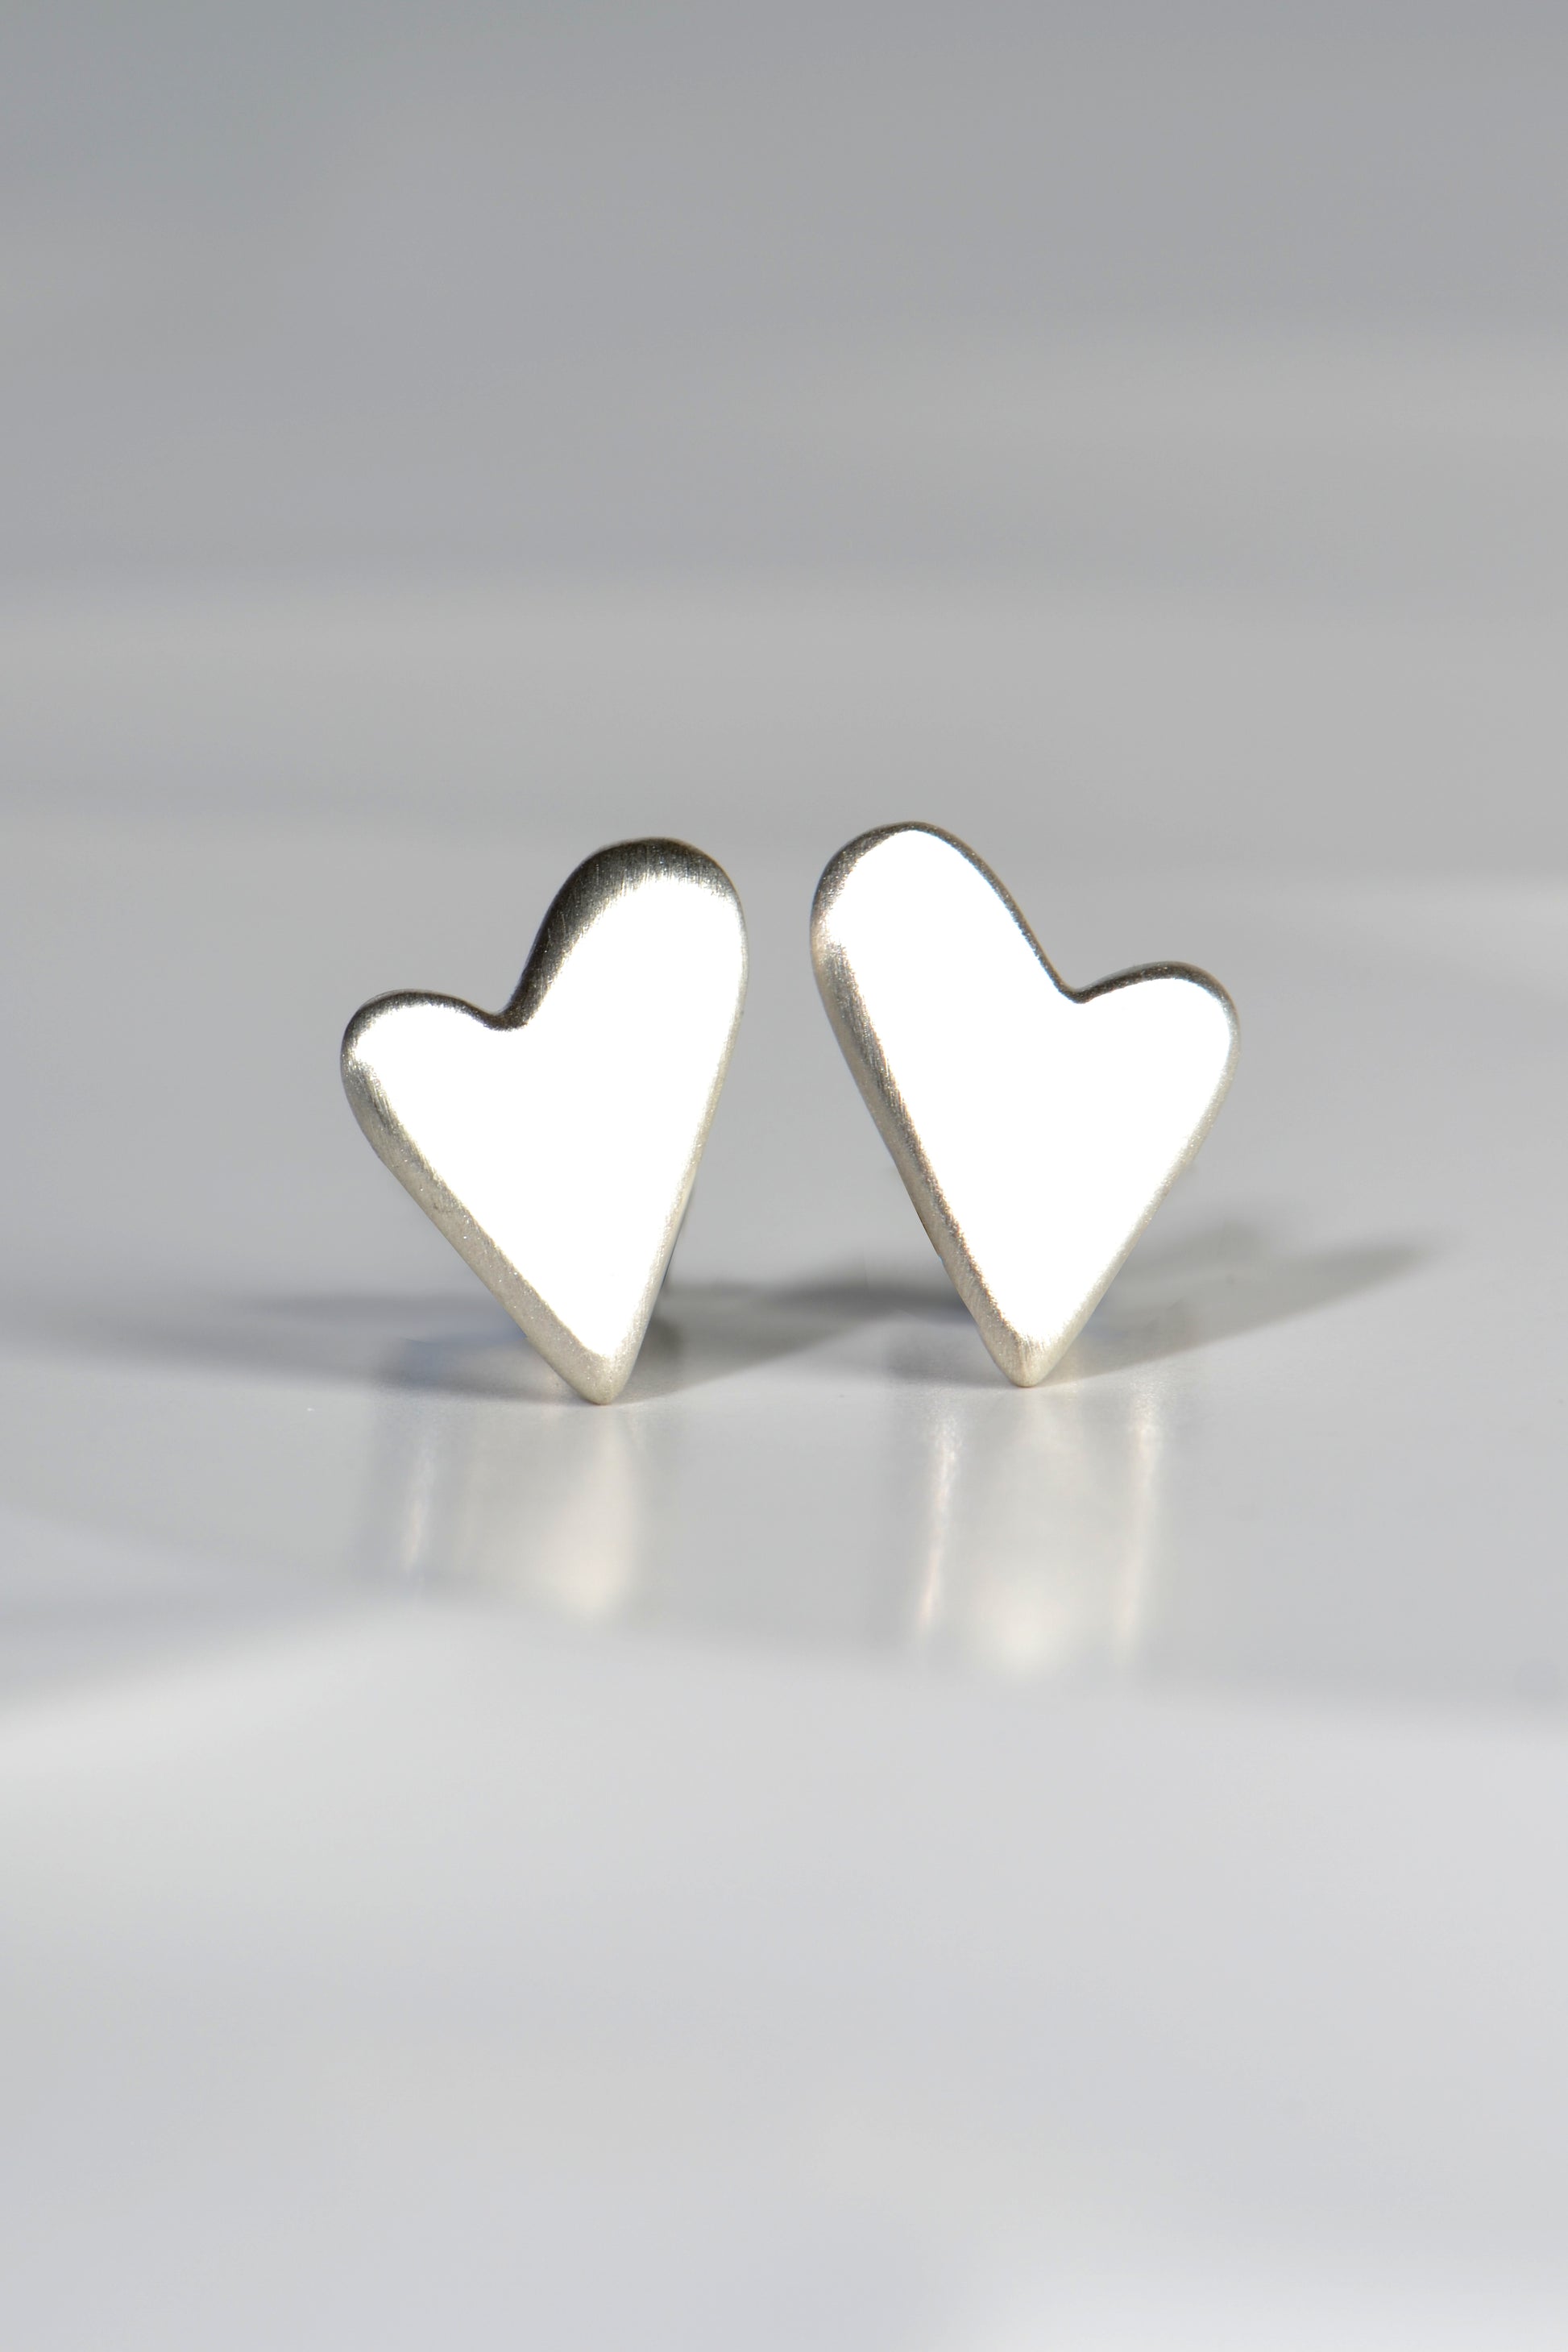 heart shaped designer earrings where the top of the heart is larger on one curved top bump than the other. They mirror each other to make a pair